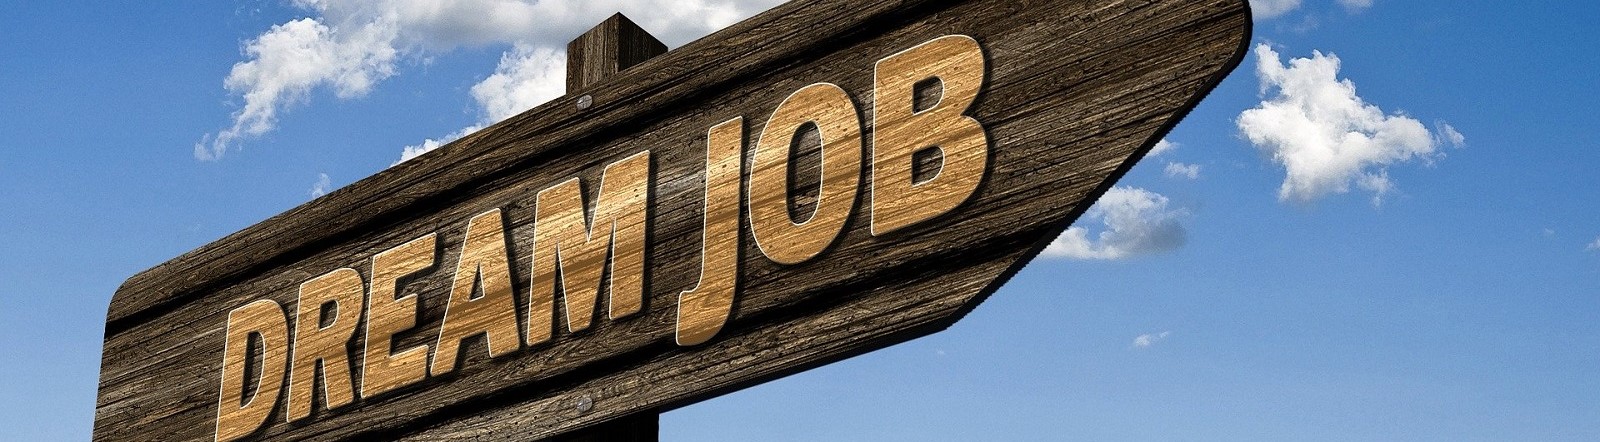 Image by Gerd Altmann from Pixabay of Dream job sign